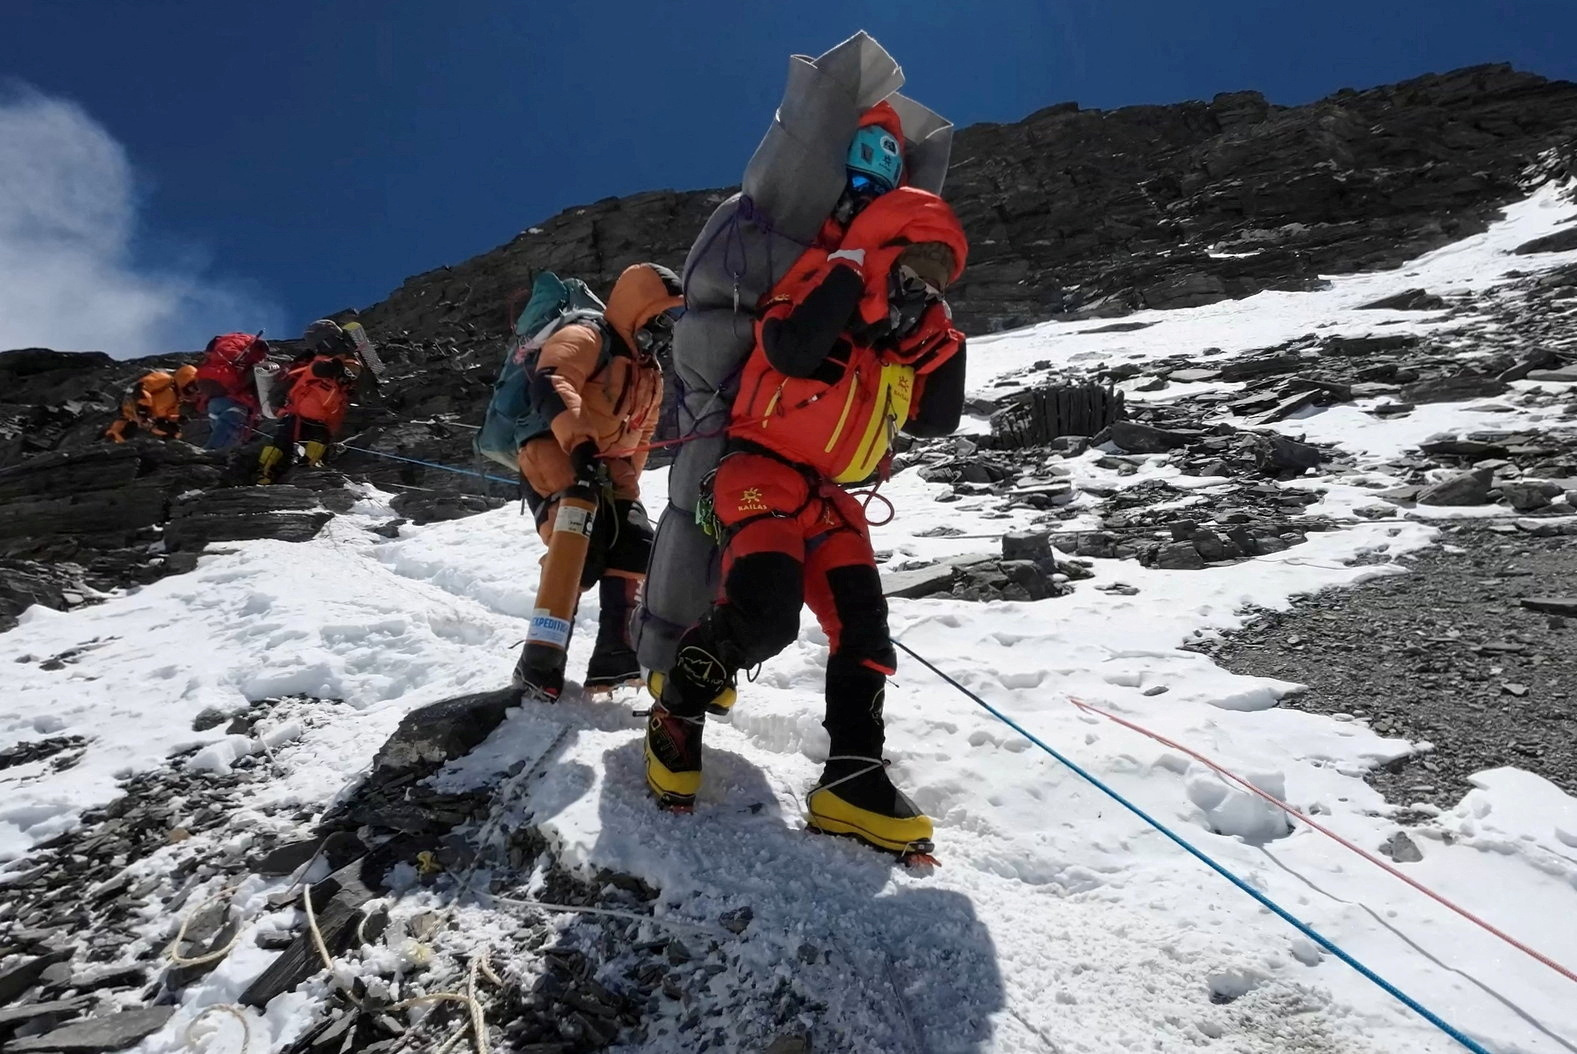 Sherpa carries struggling climber thousands of feet down Mount Everest in  rare high-altitude rescue - ABC News